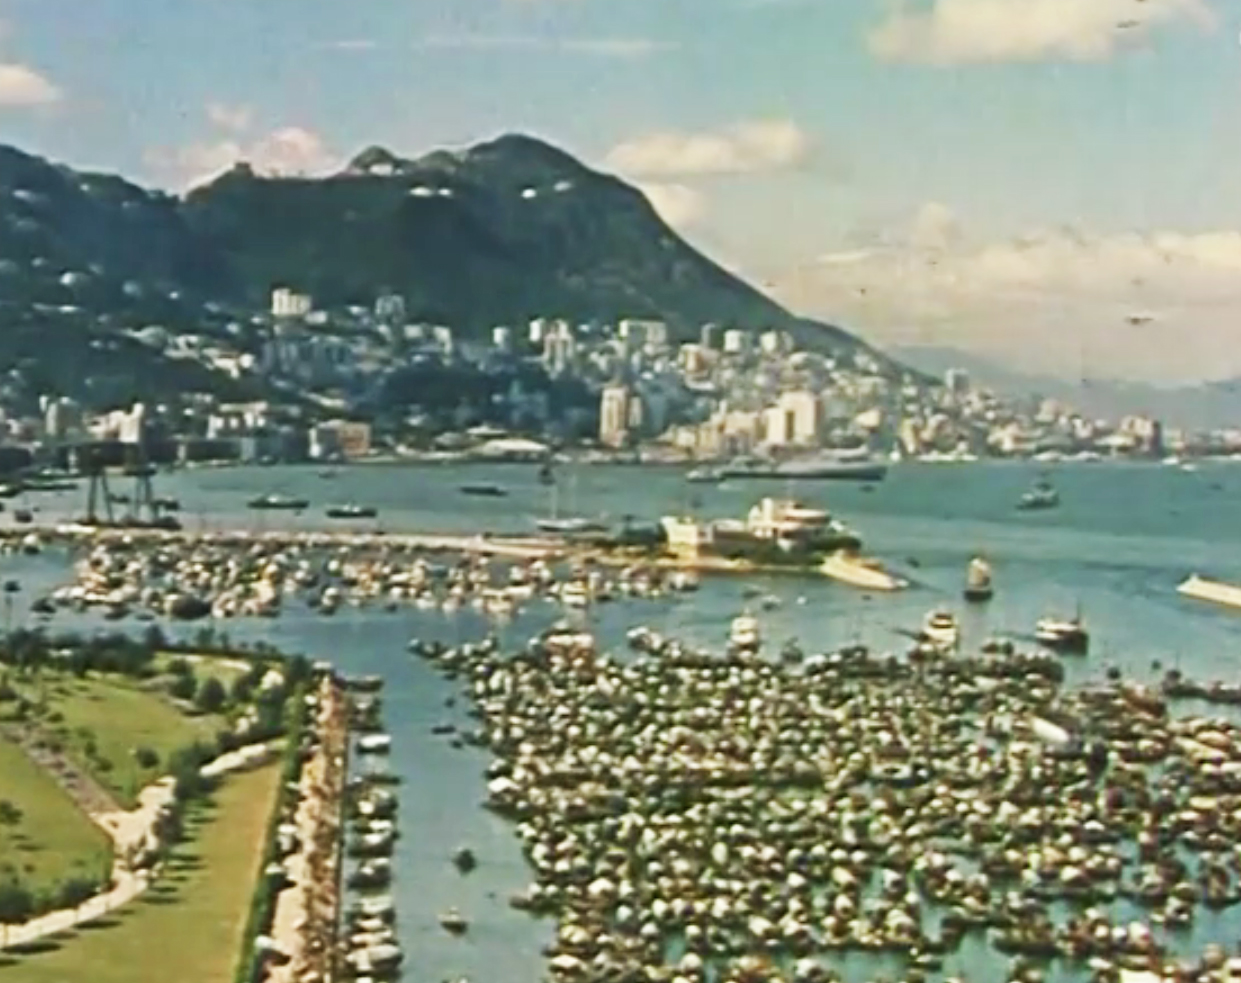 A view of the Hong Kong Island in 1961.